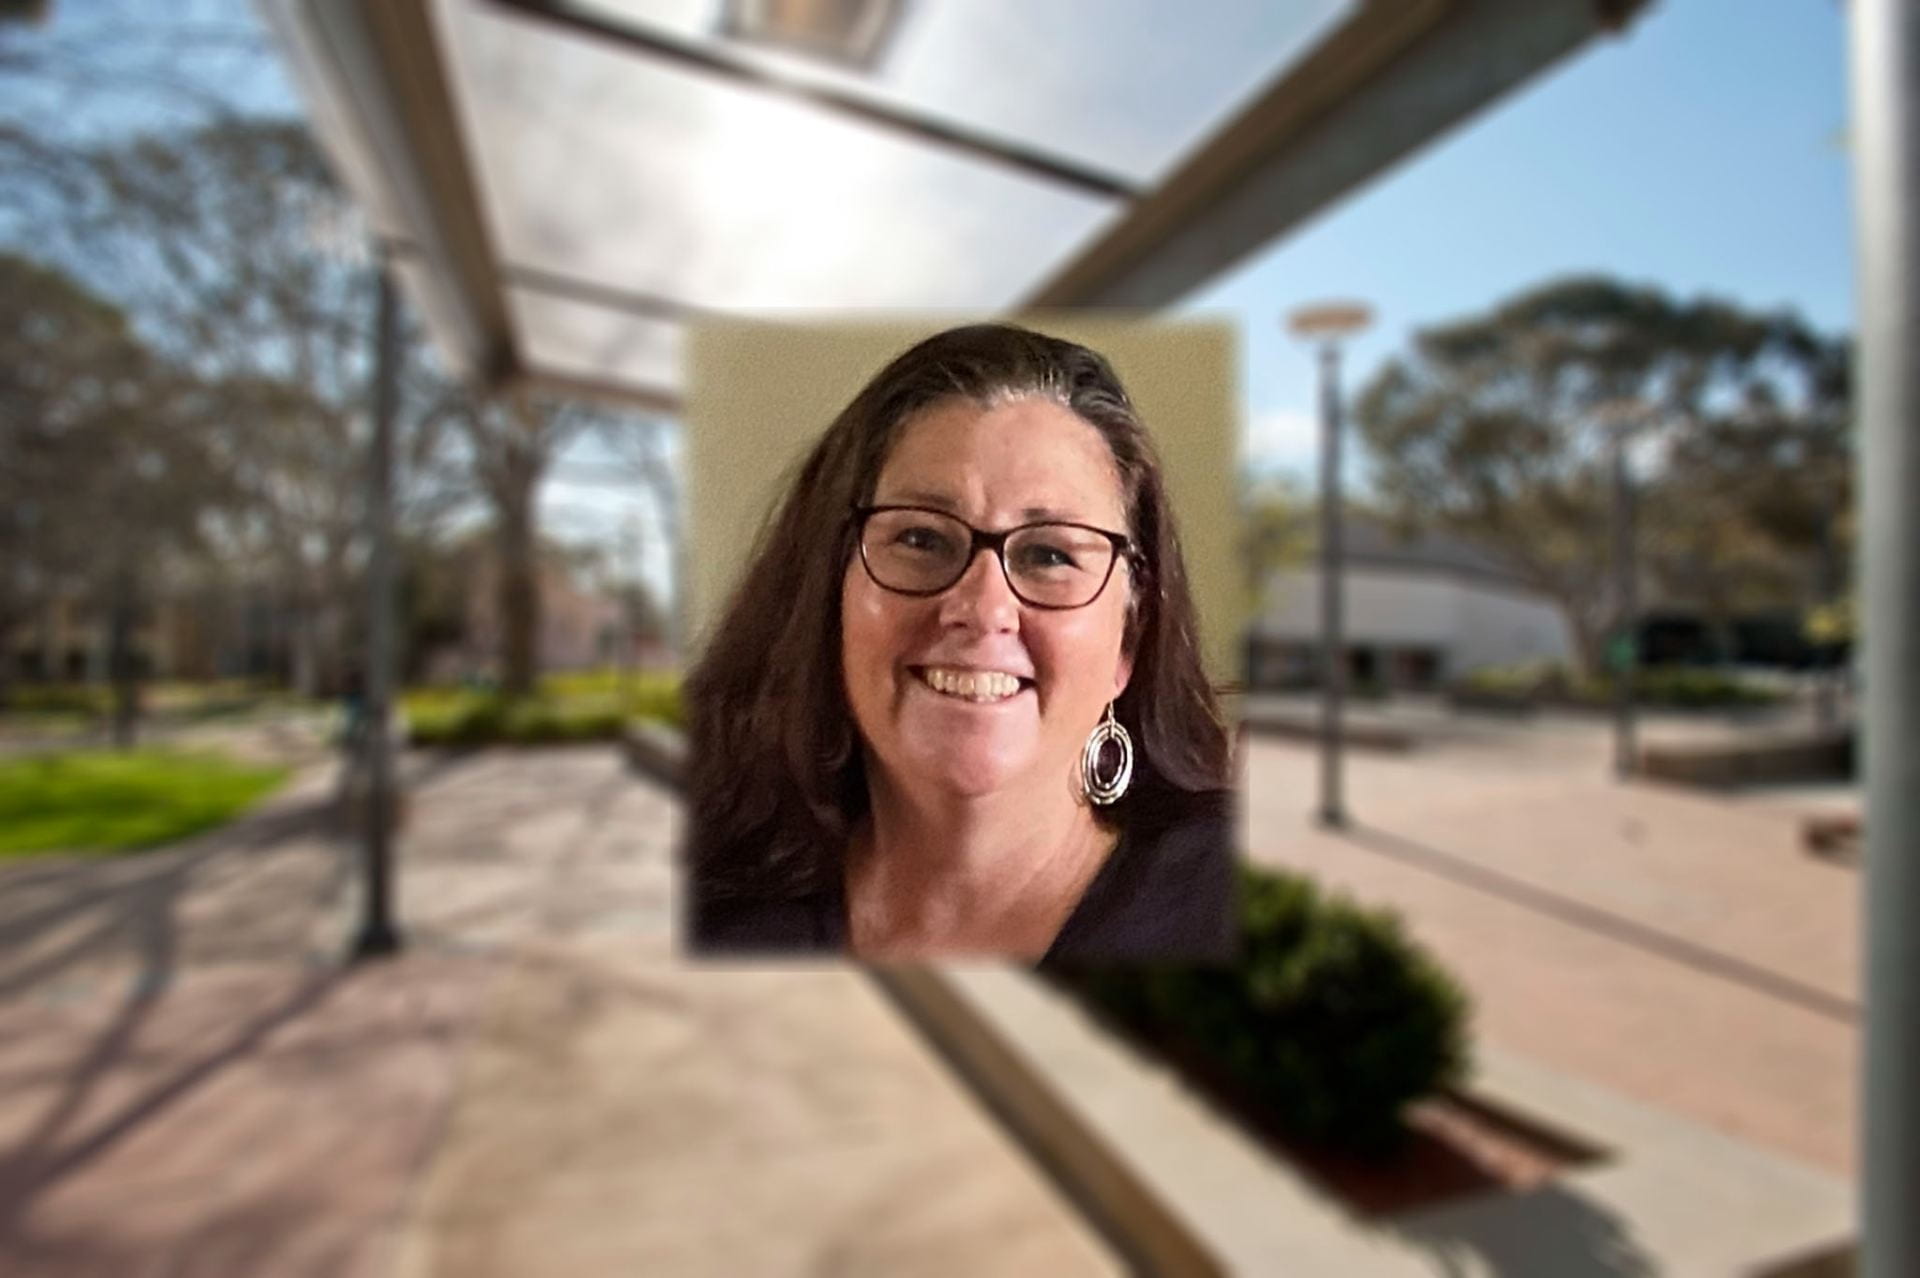 Portrait image of UNE Sue Smith against a blurred background of a university setting